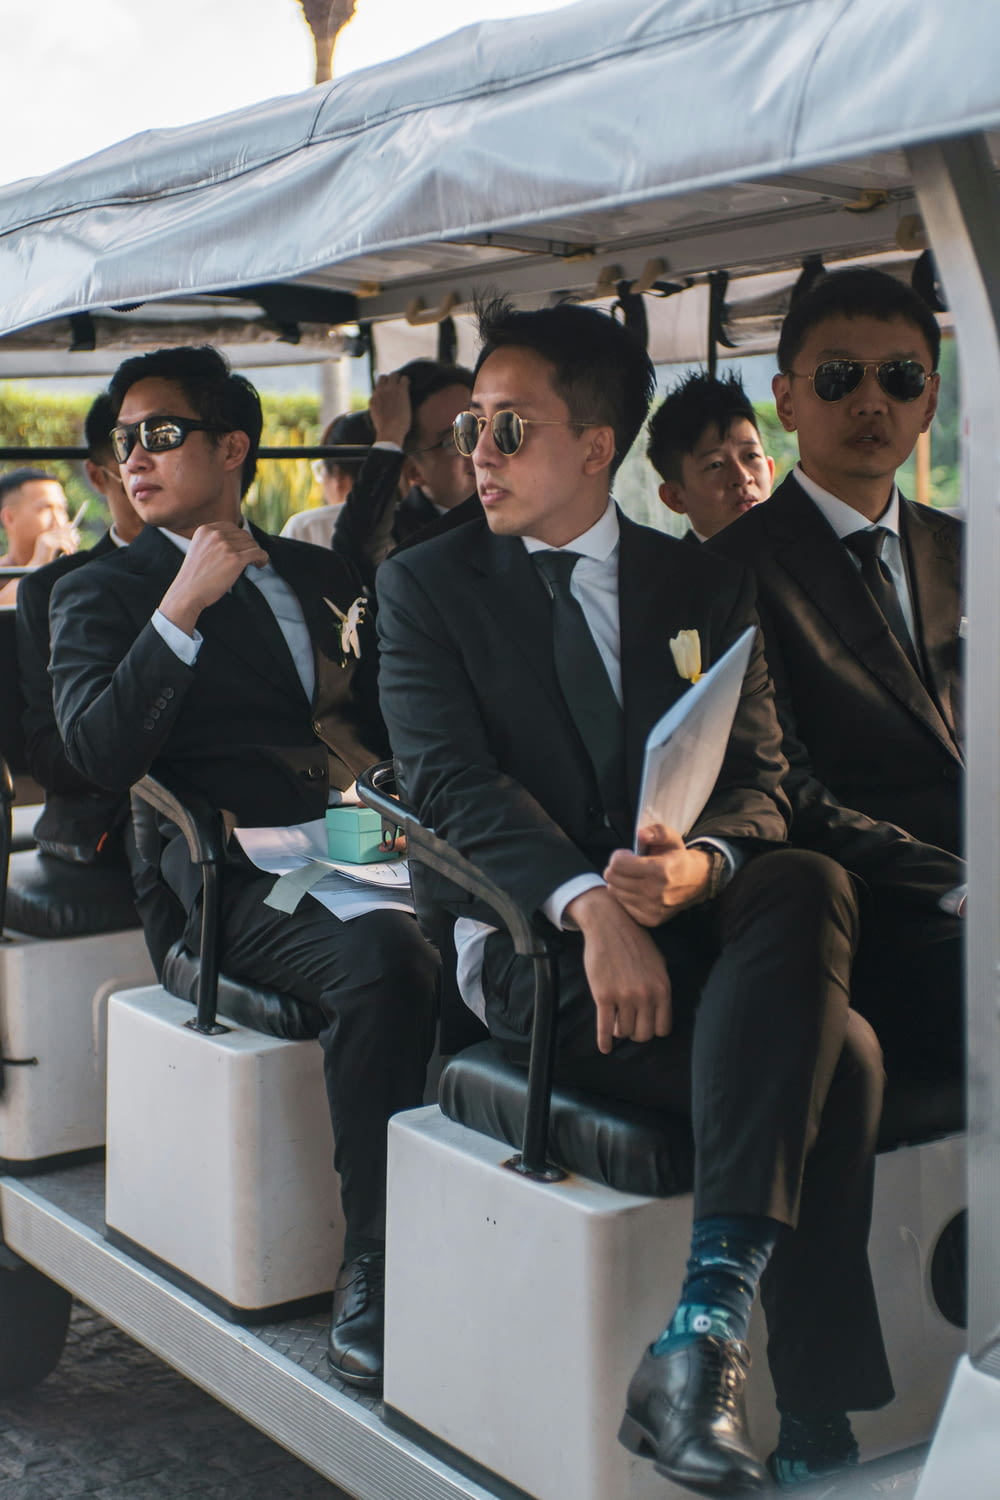 a group of men in suits sitting on a golf cart